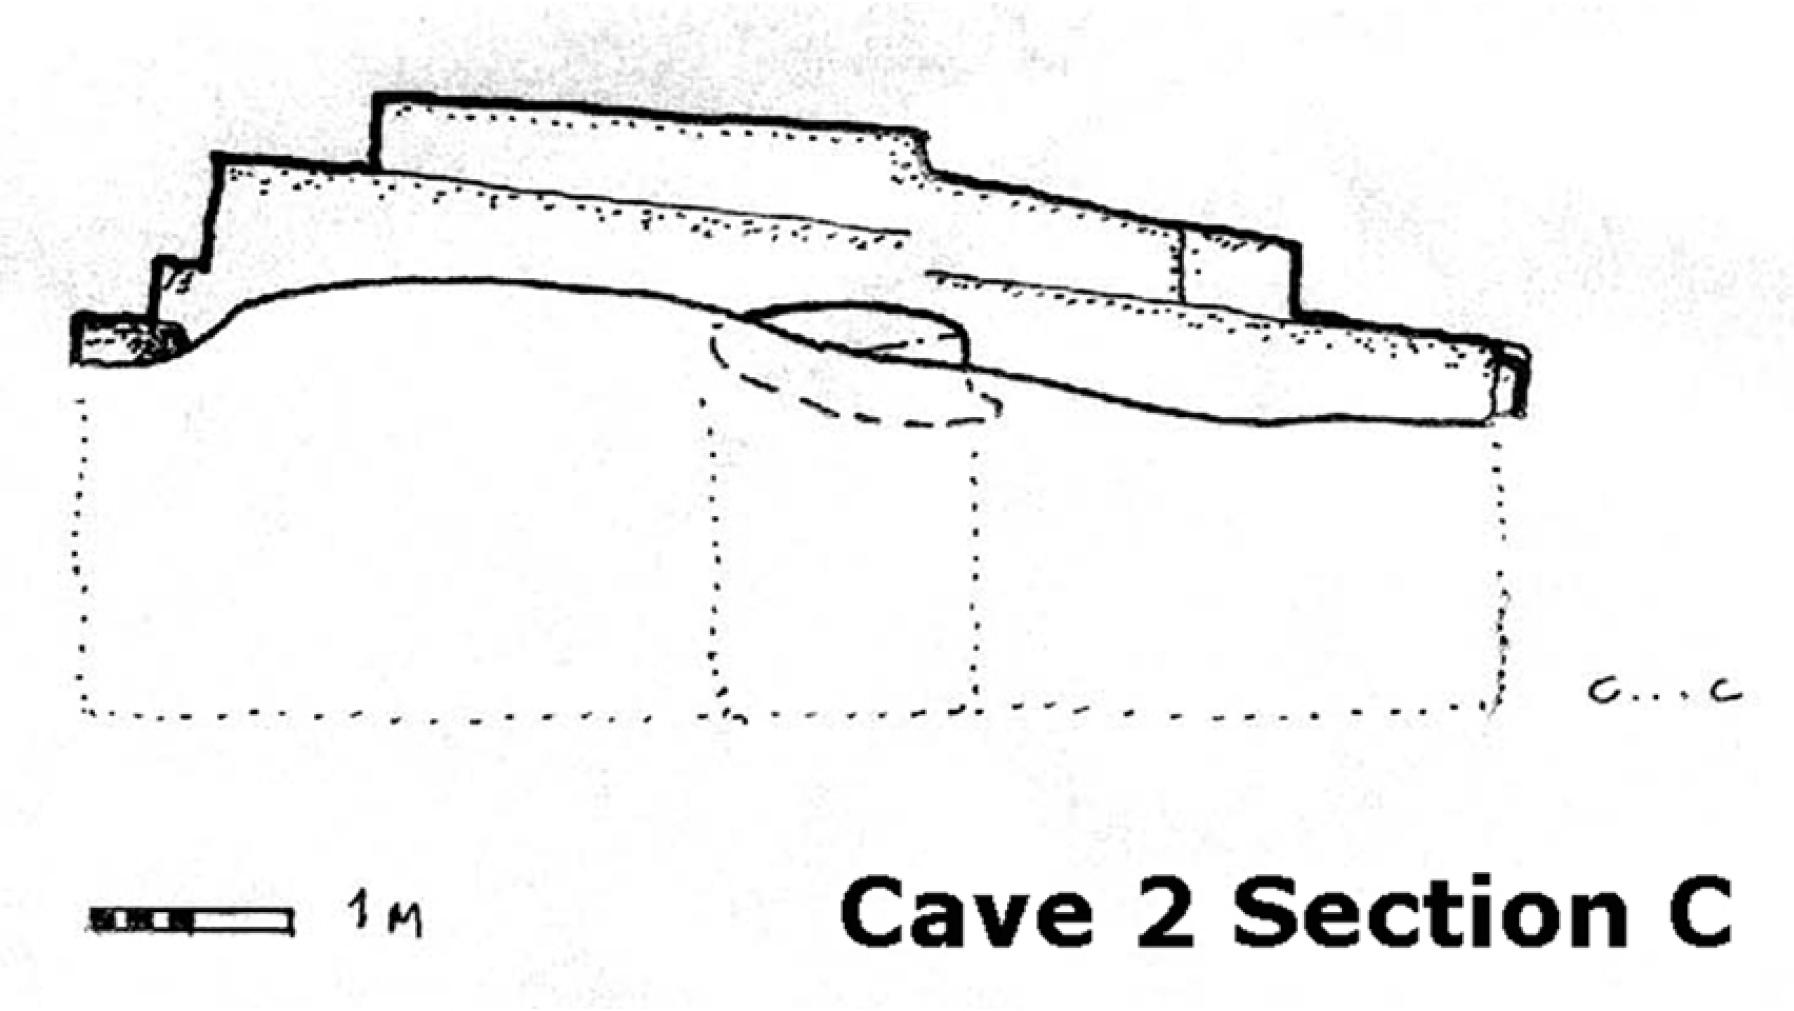 Cave 2 Section C